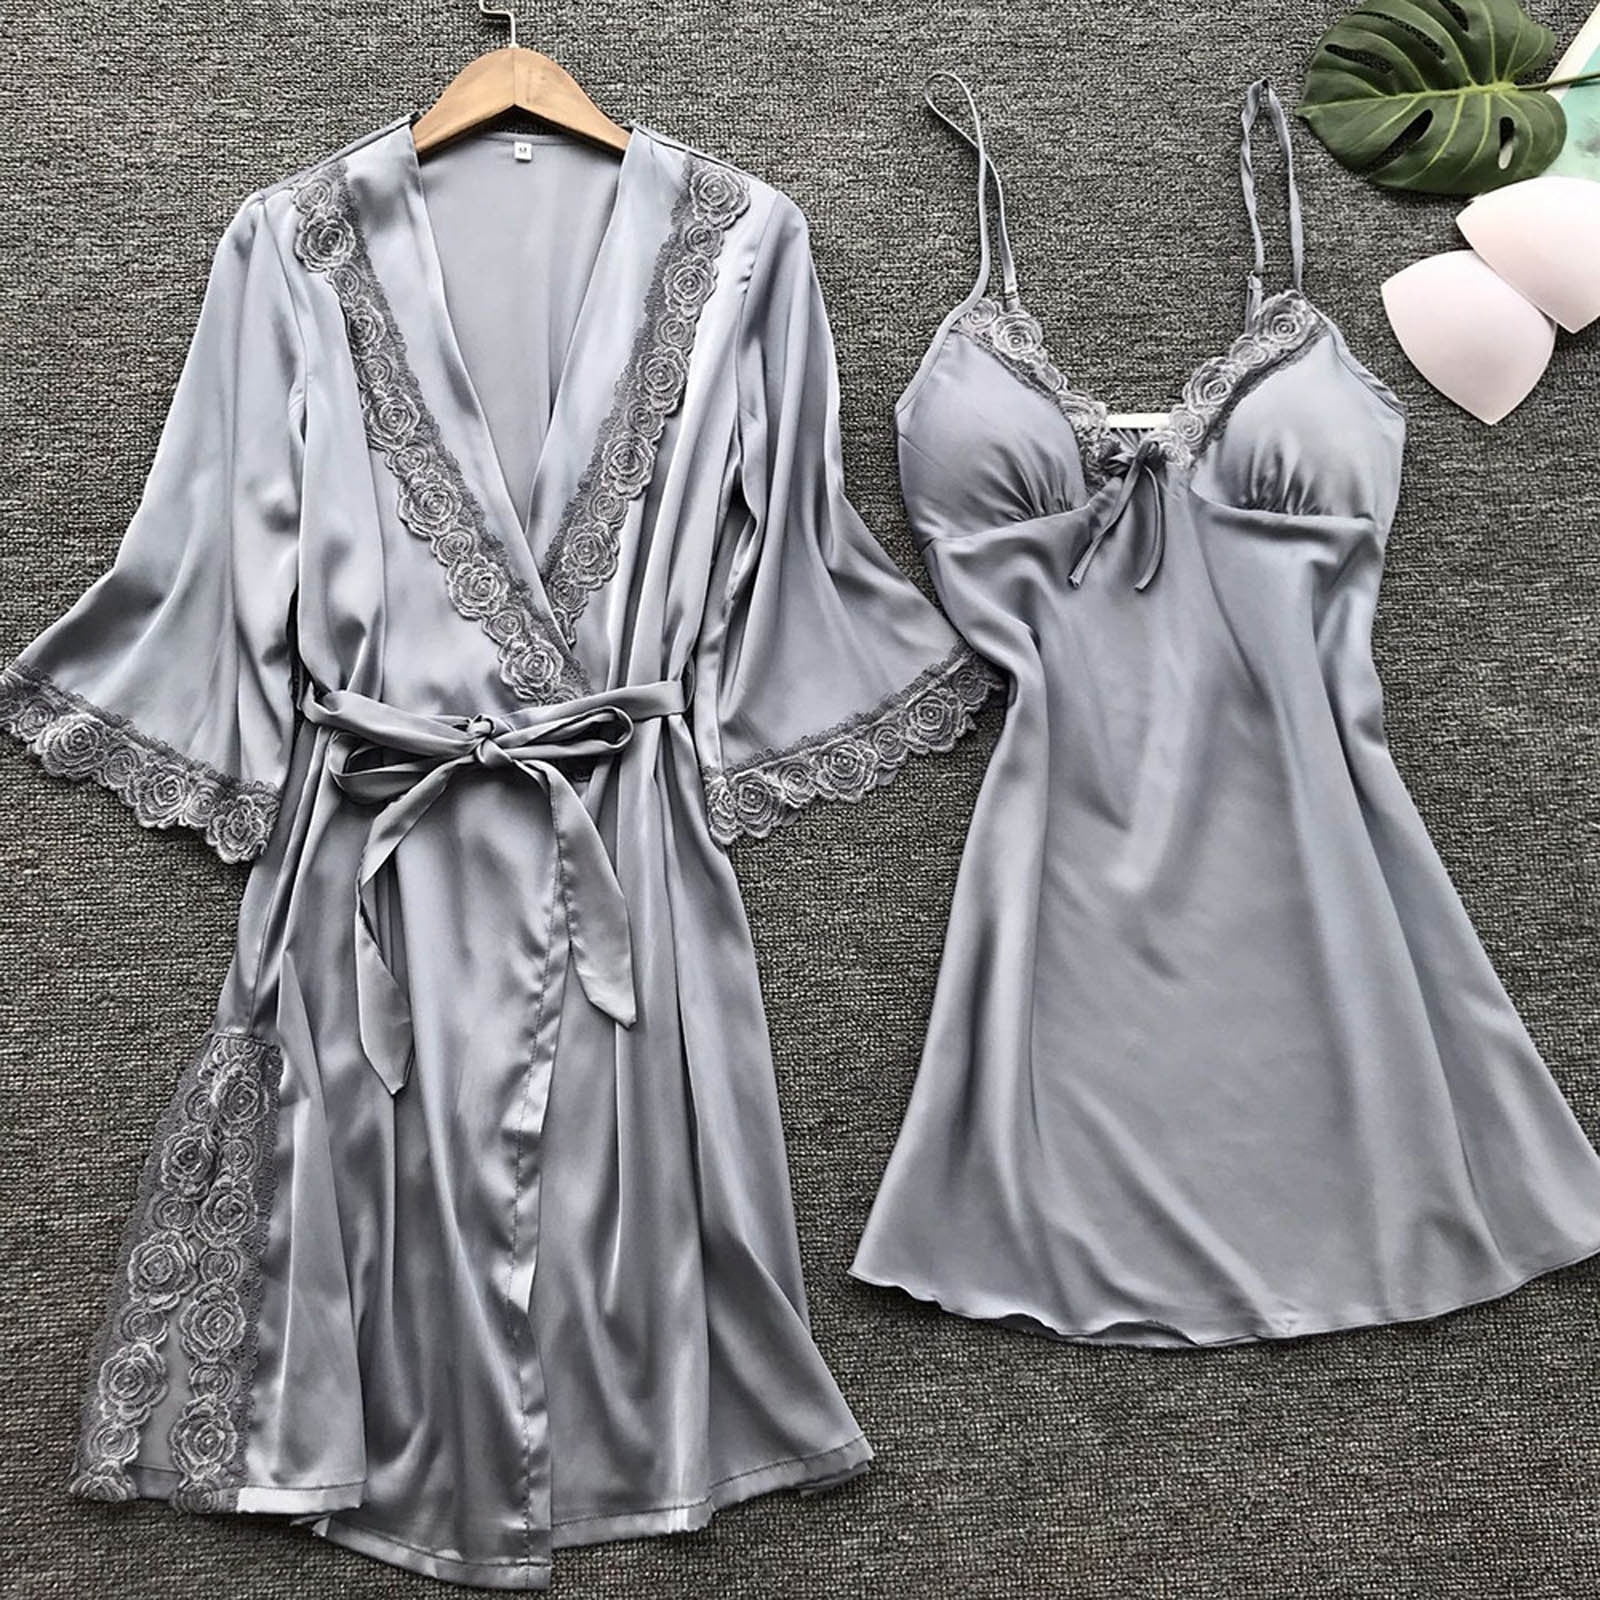 Yuwull Woman Sleepwear Sleep Wear Ladies Fashion Comfortable Solid Color  Lace Suspenders Pajamas Dress Woman Nightgown Home Clothes Suit Women  Sleepwear On Clearance 